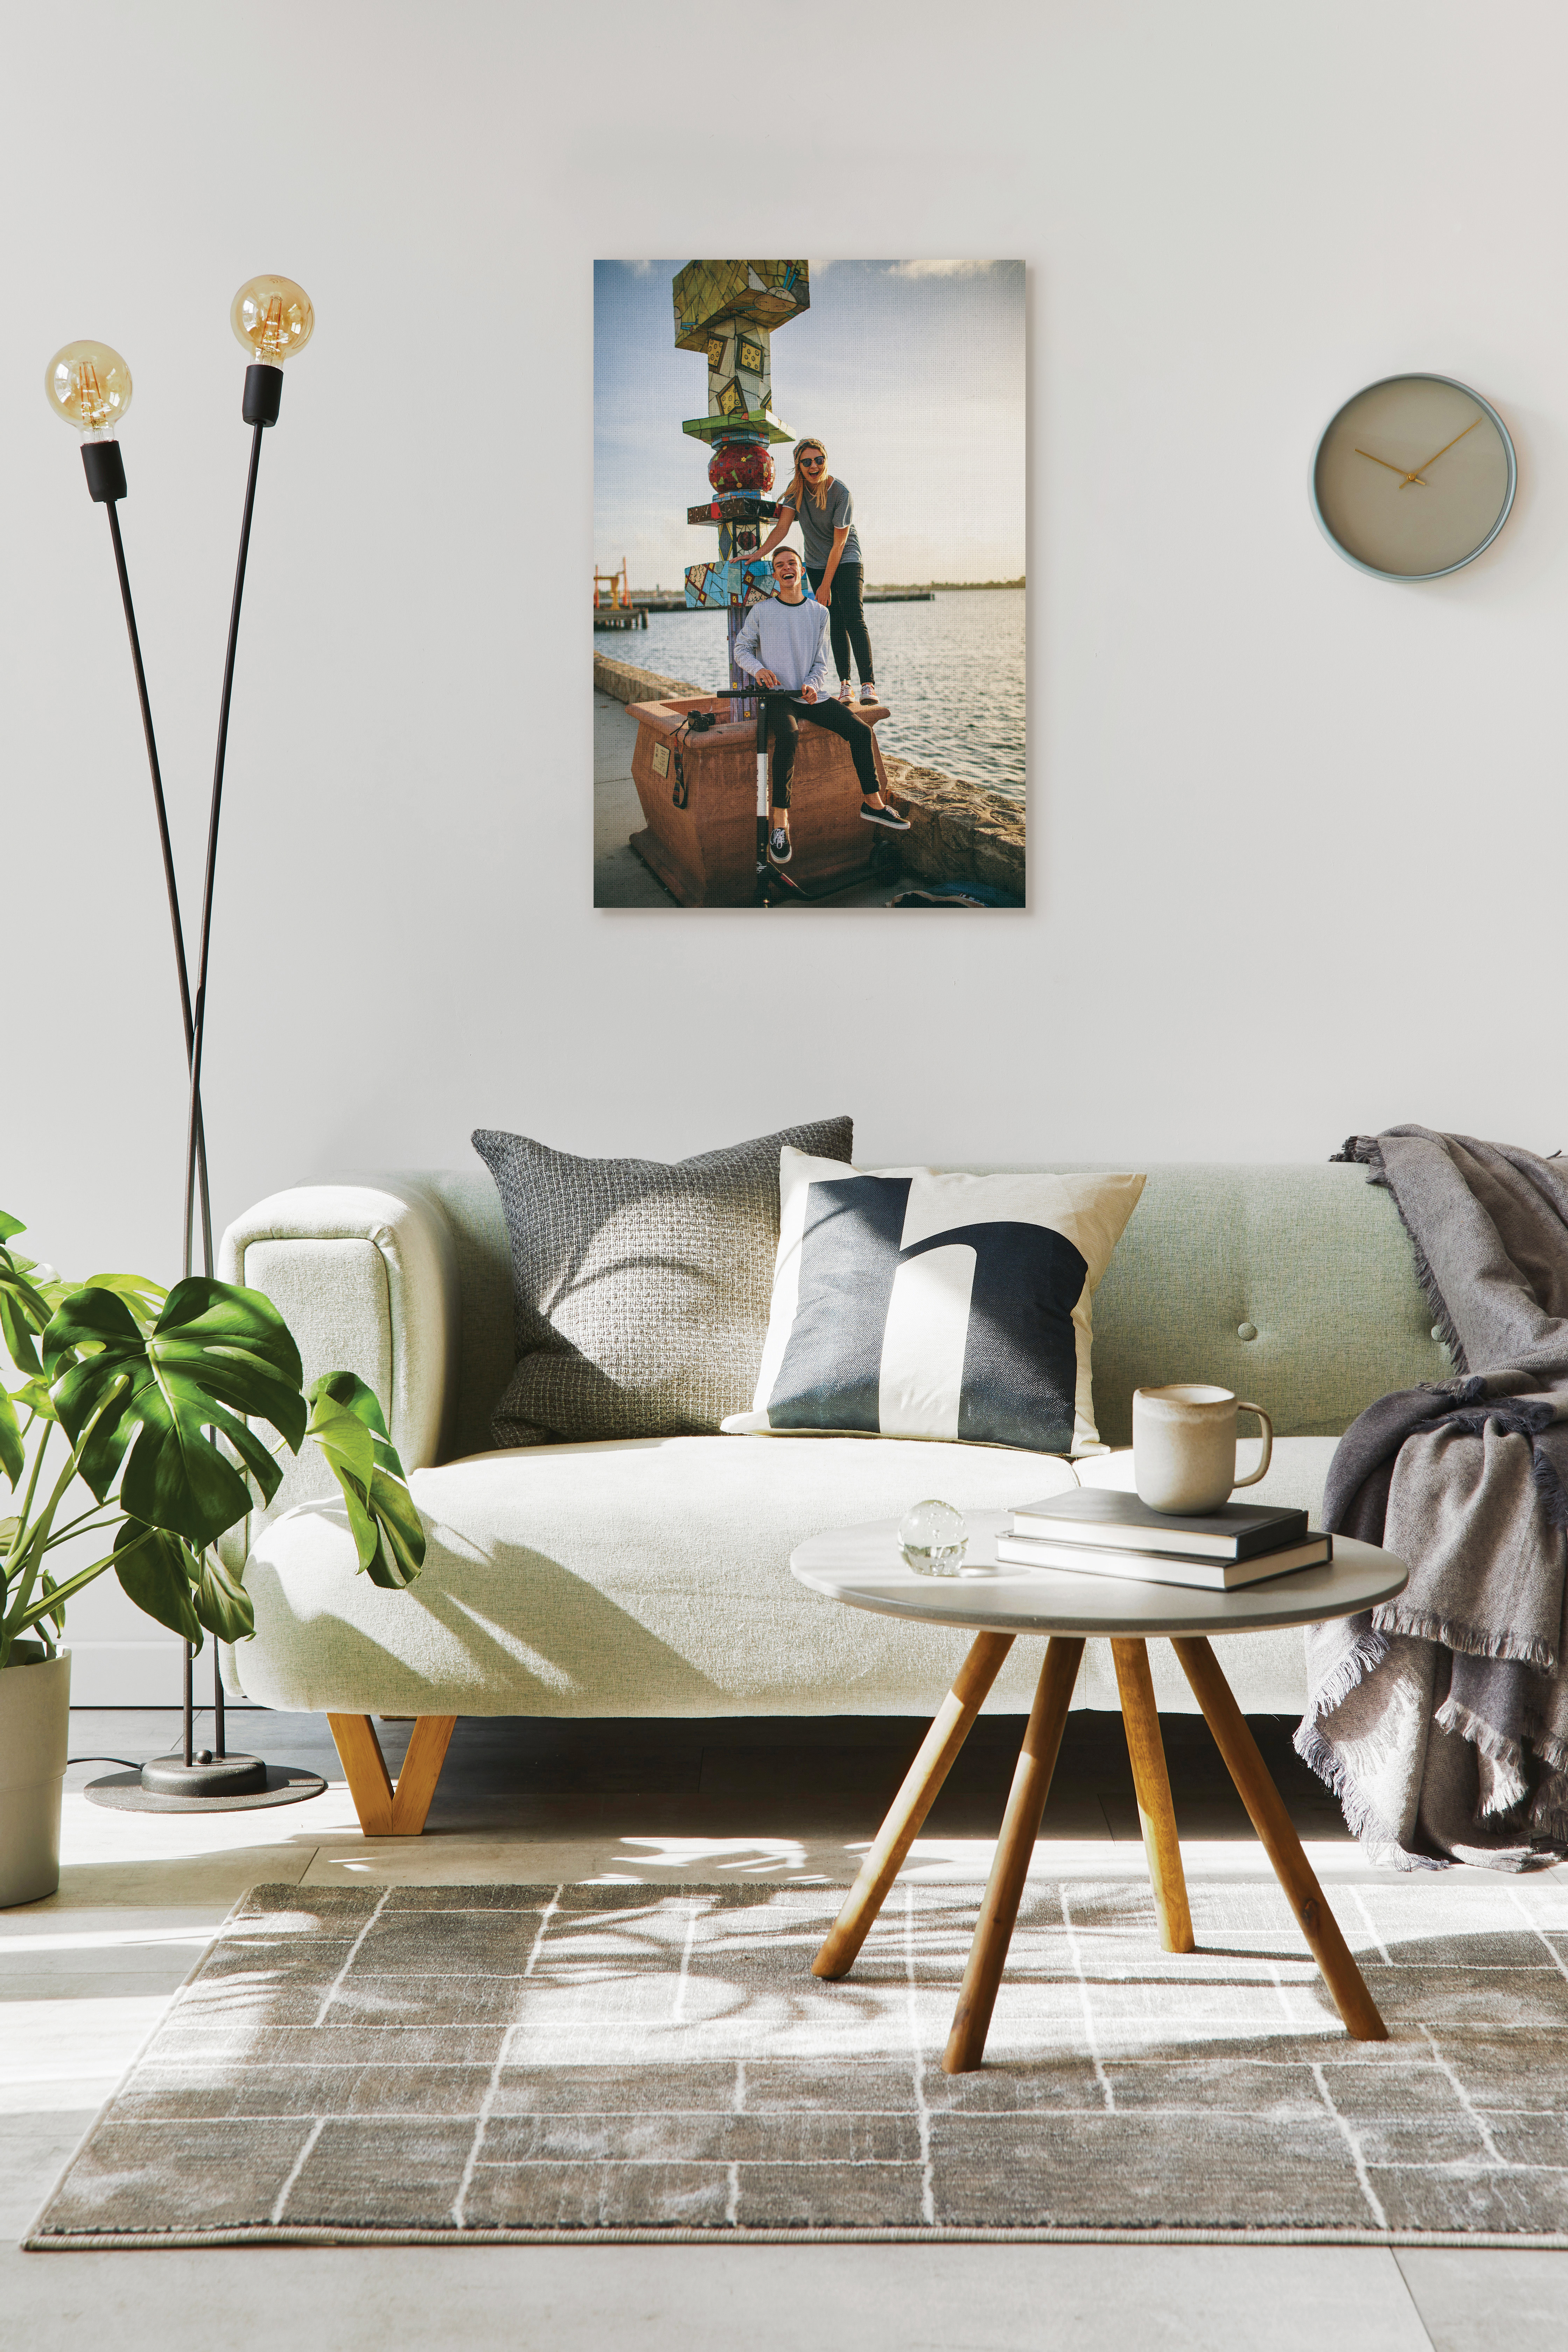 Canvas print in living room of friends by the water